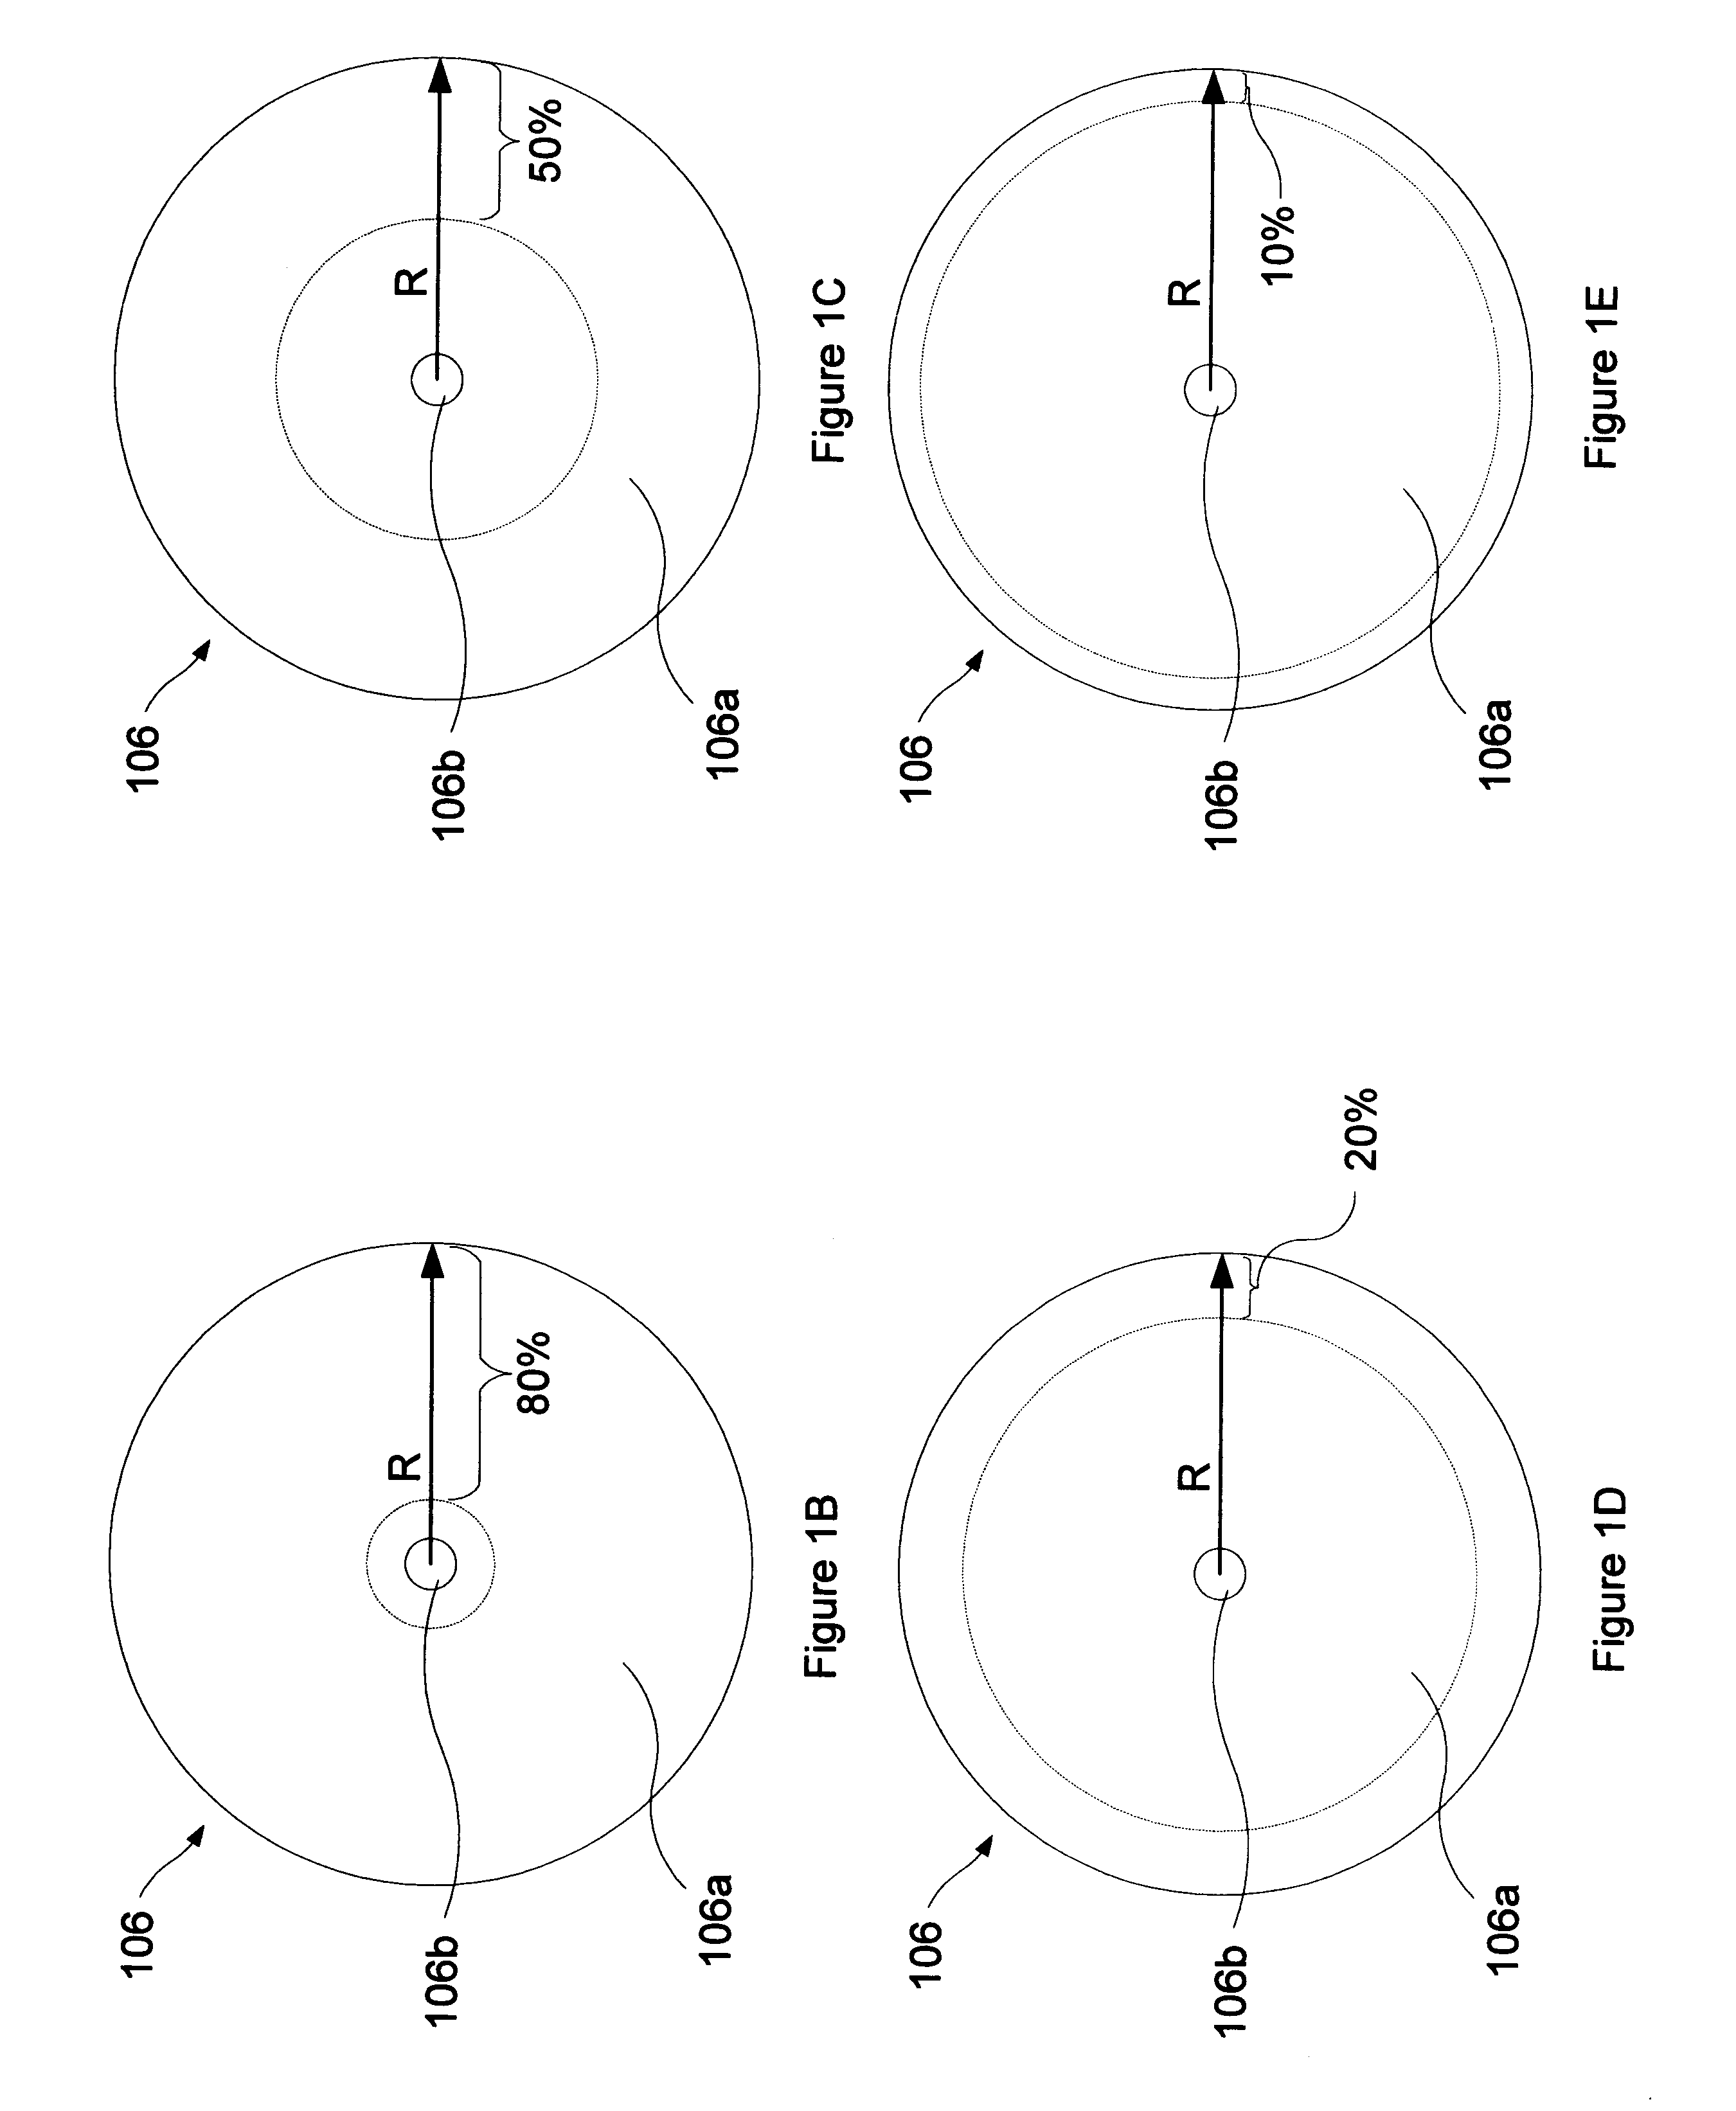 Identifier system and components for optical assemblies